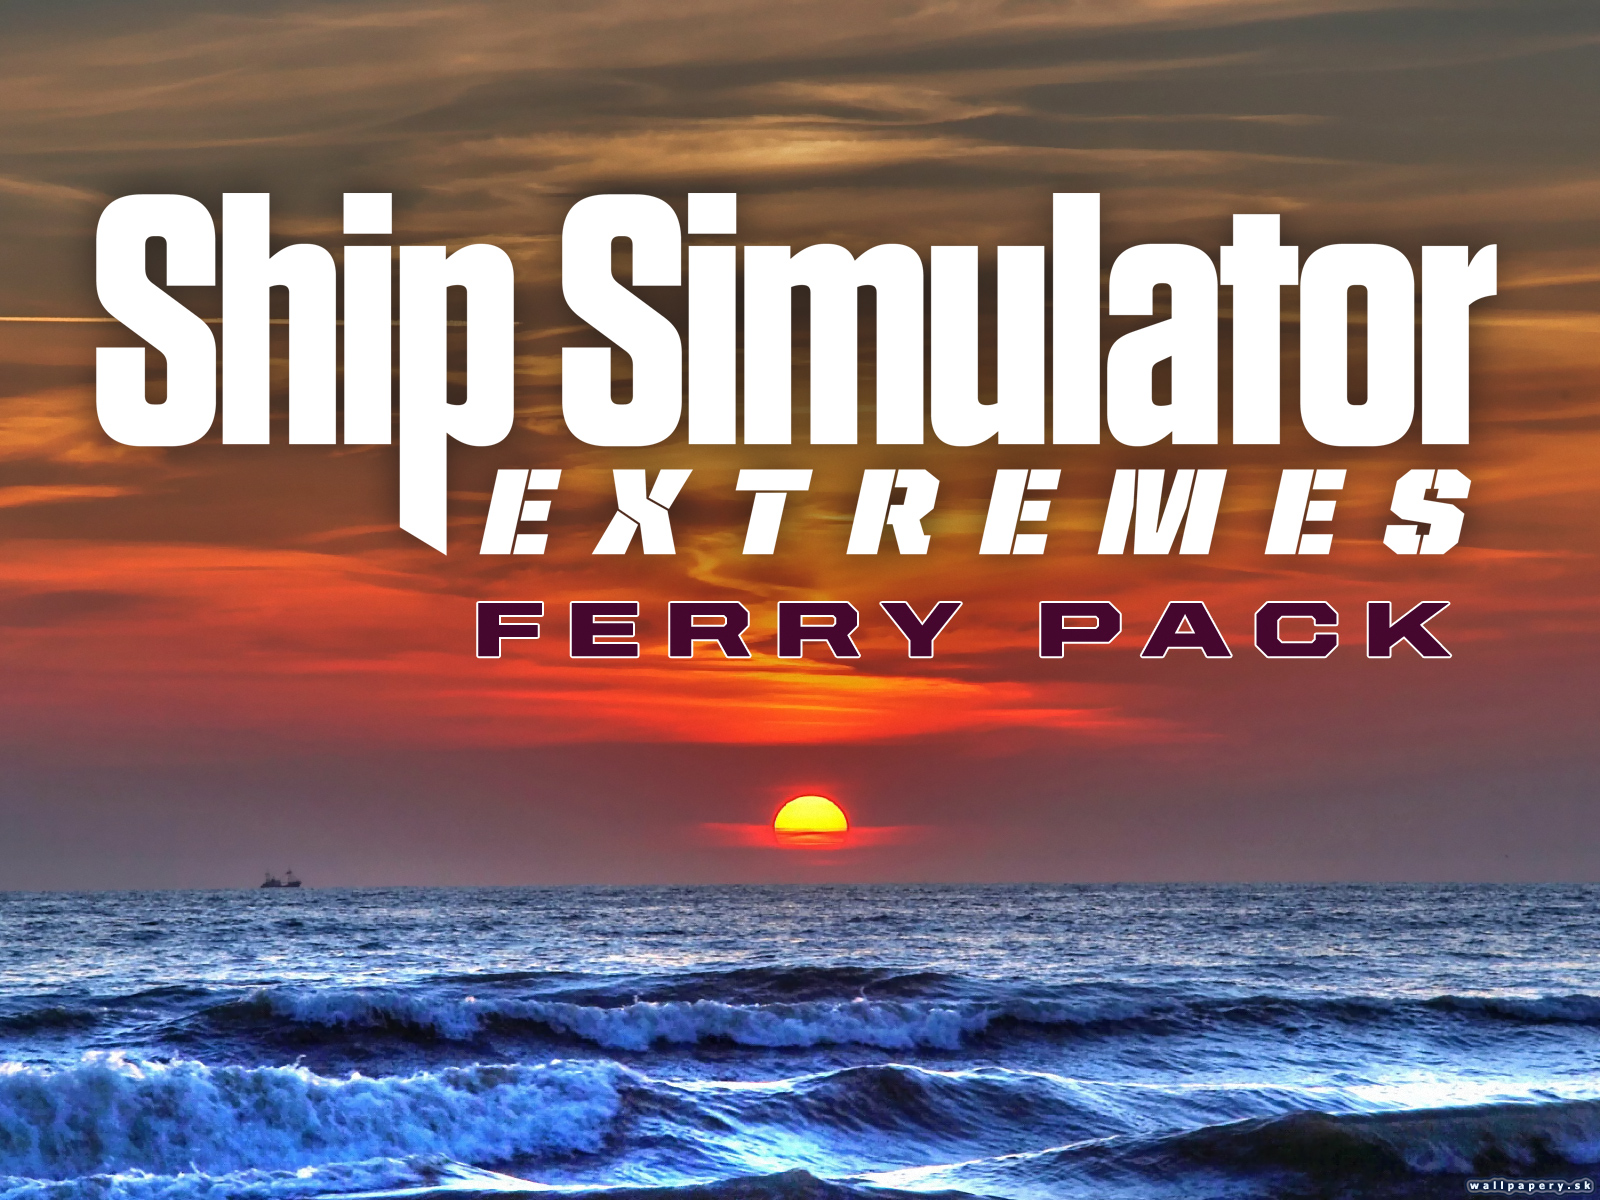 Ship Simulator Extremes: Ferry Pack - wallpaper 2